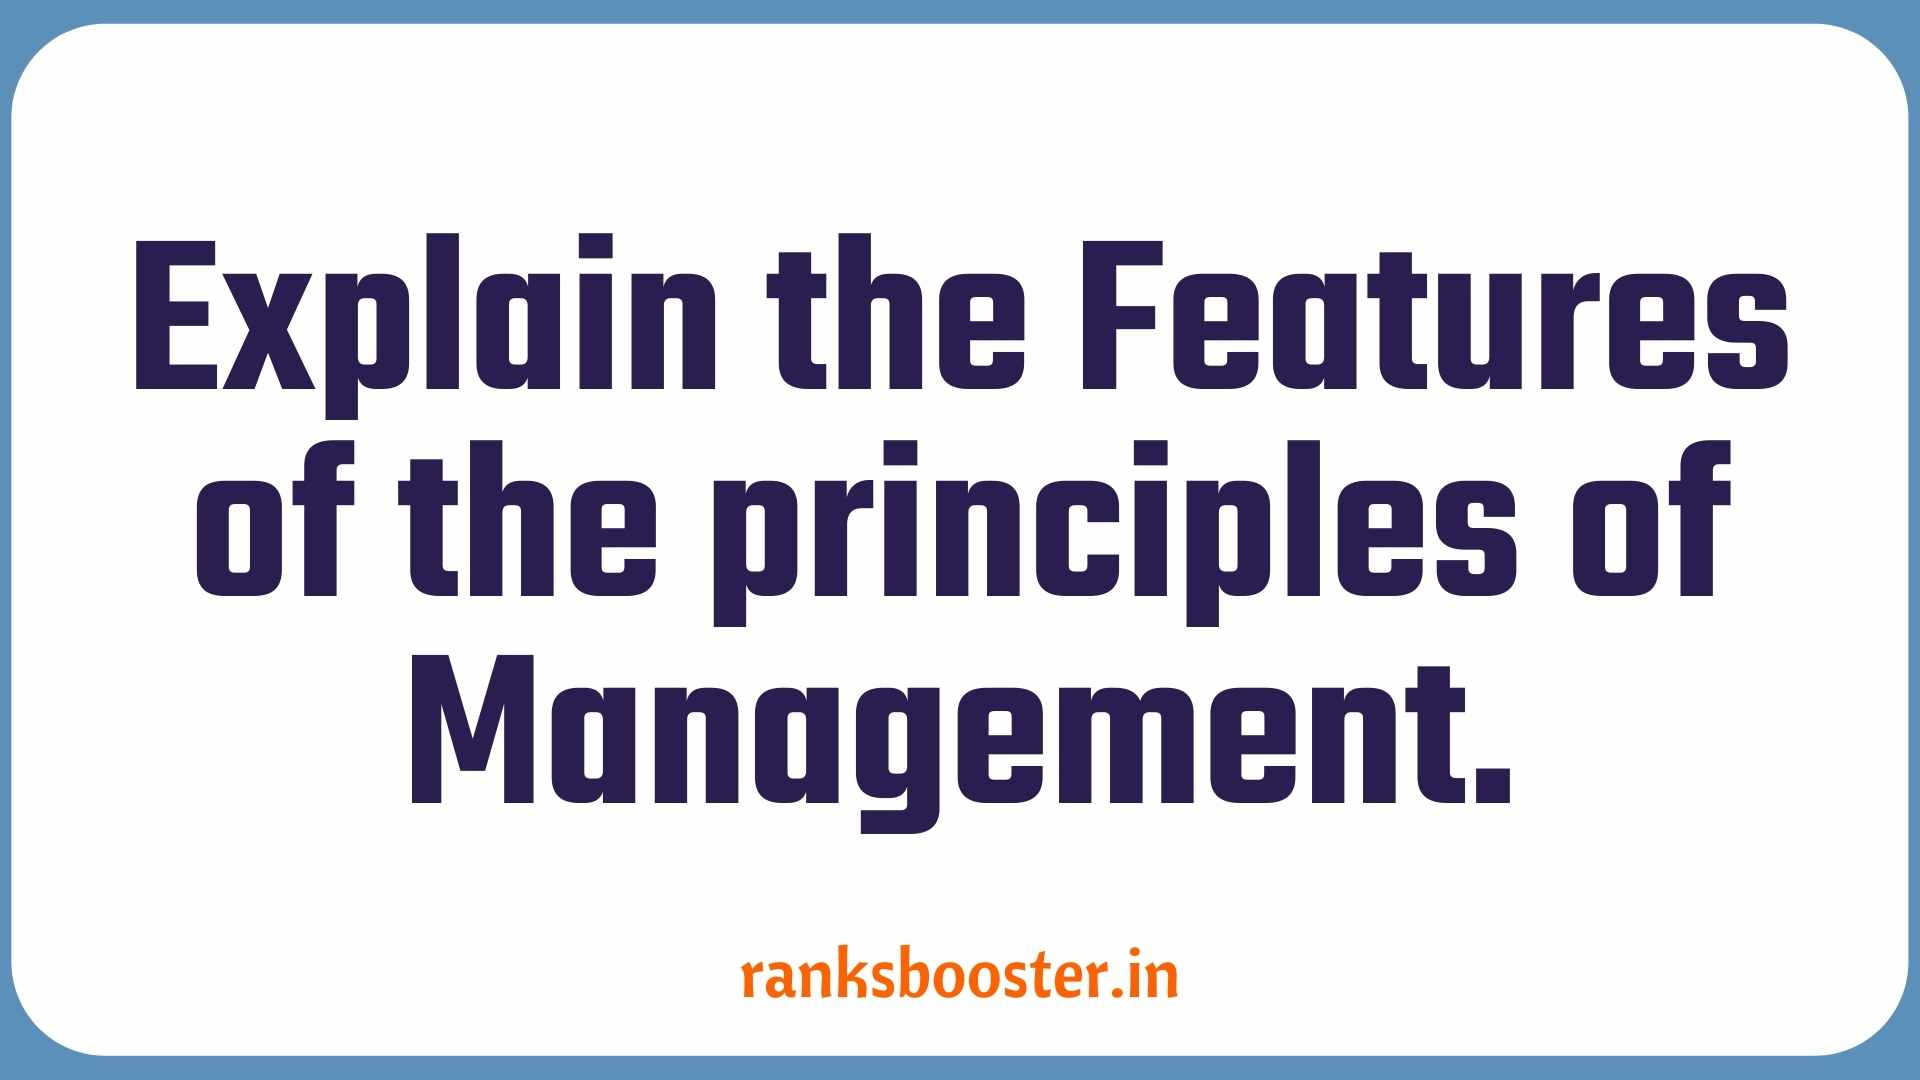 Explain the Features of the principles of Management